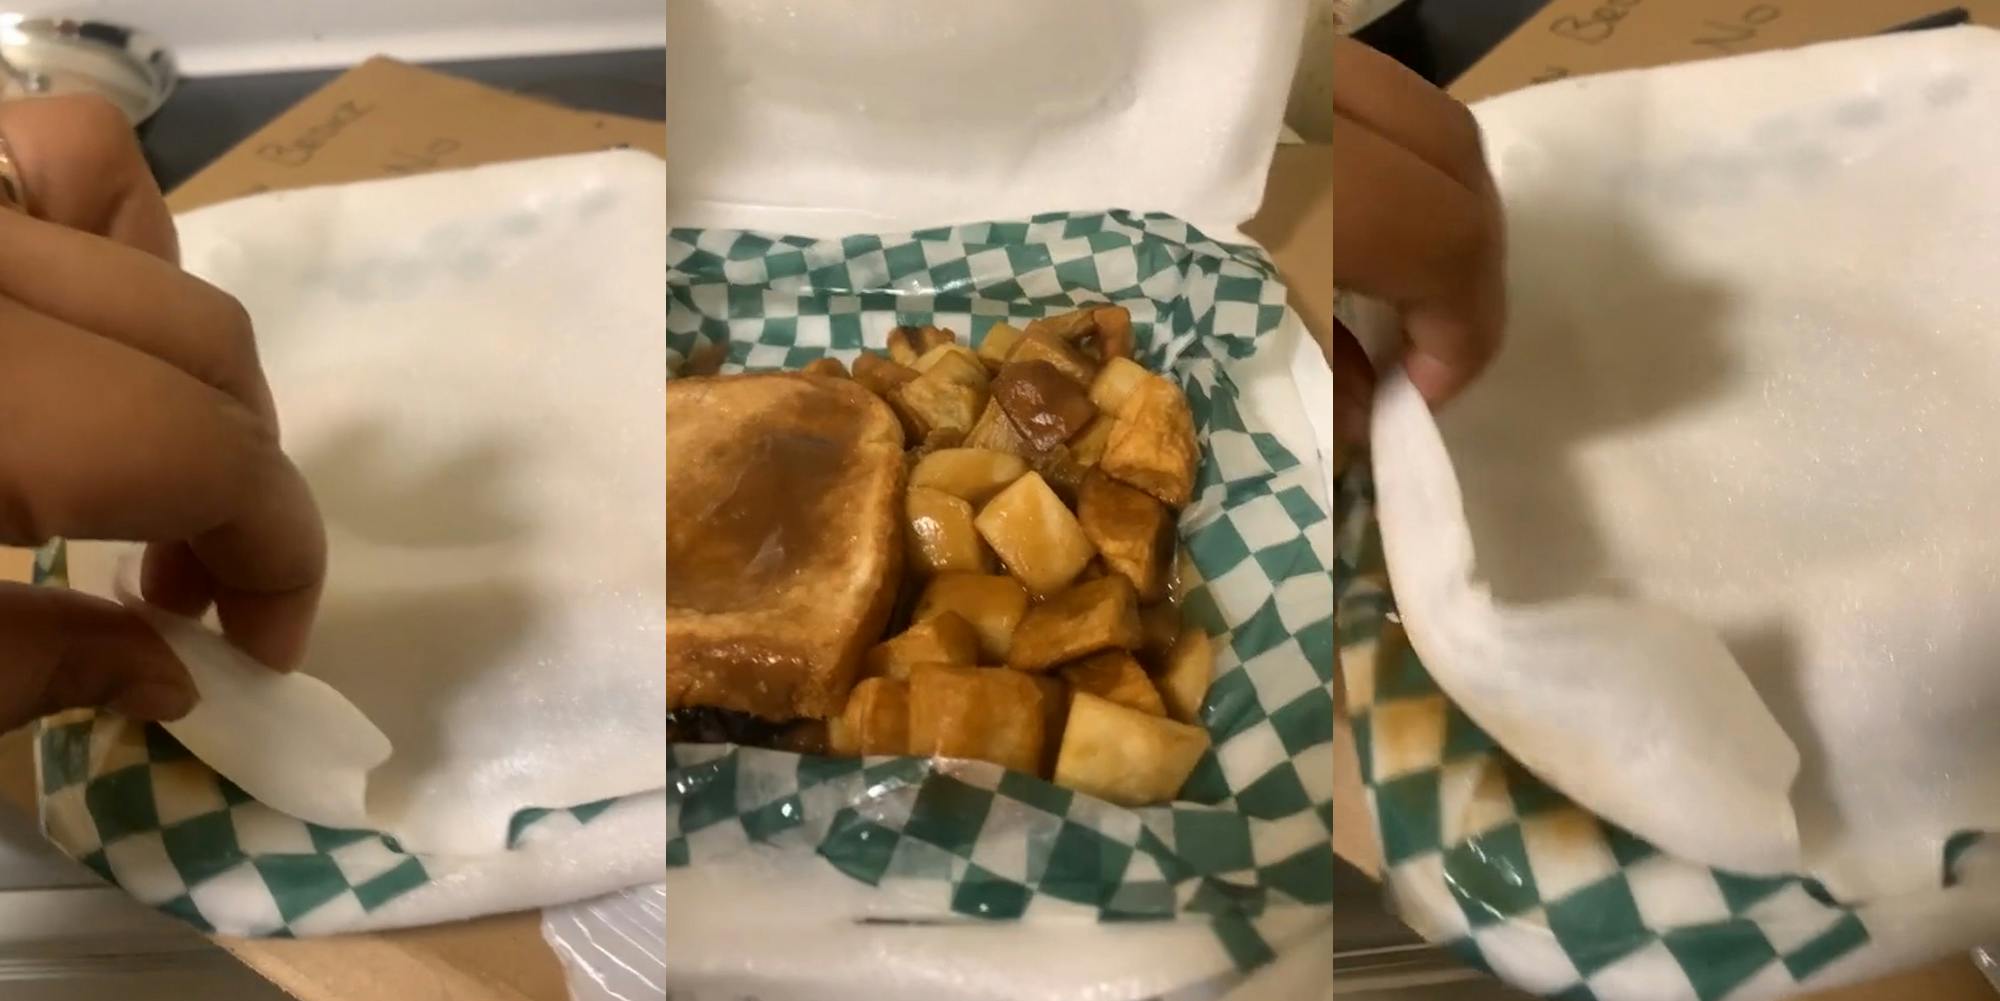 person trying to lift styrofoam lid off food (l) styrofoam container finally opened fully to reveal food (c) person trying to lift styrofoam lid on food (r)